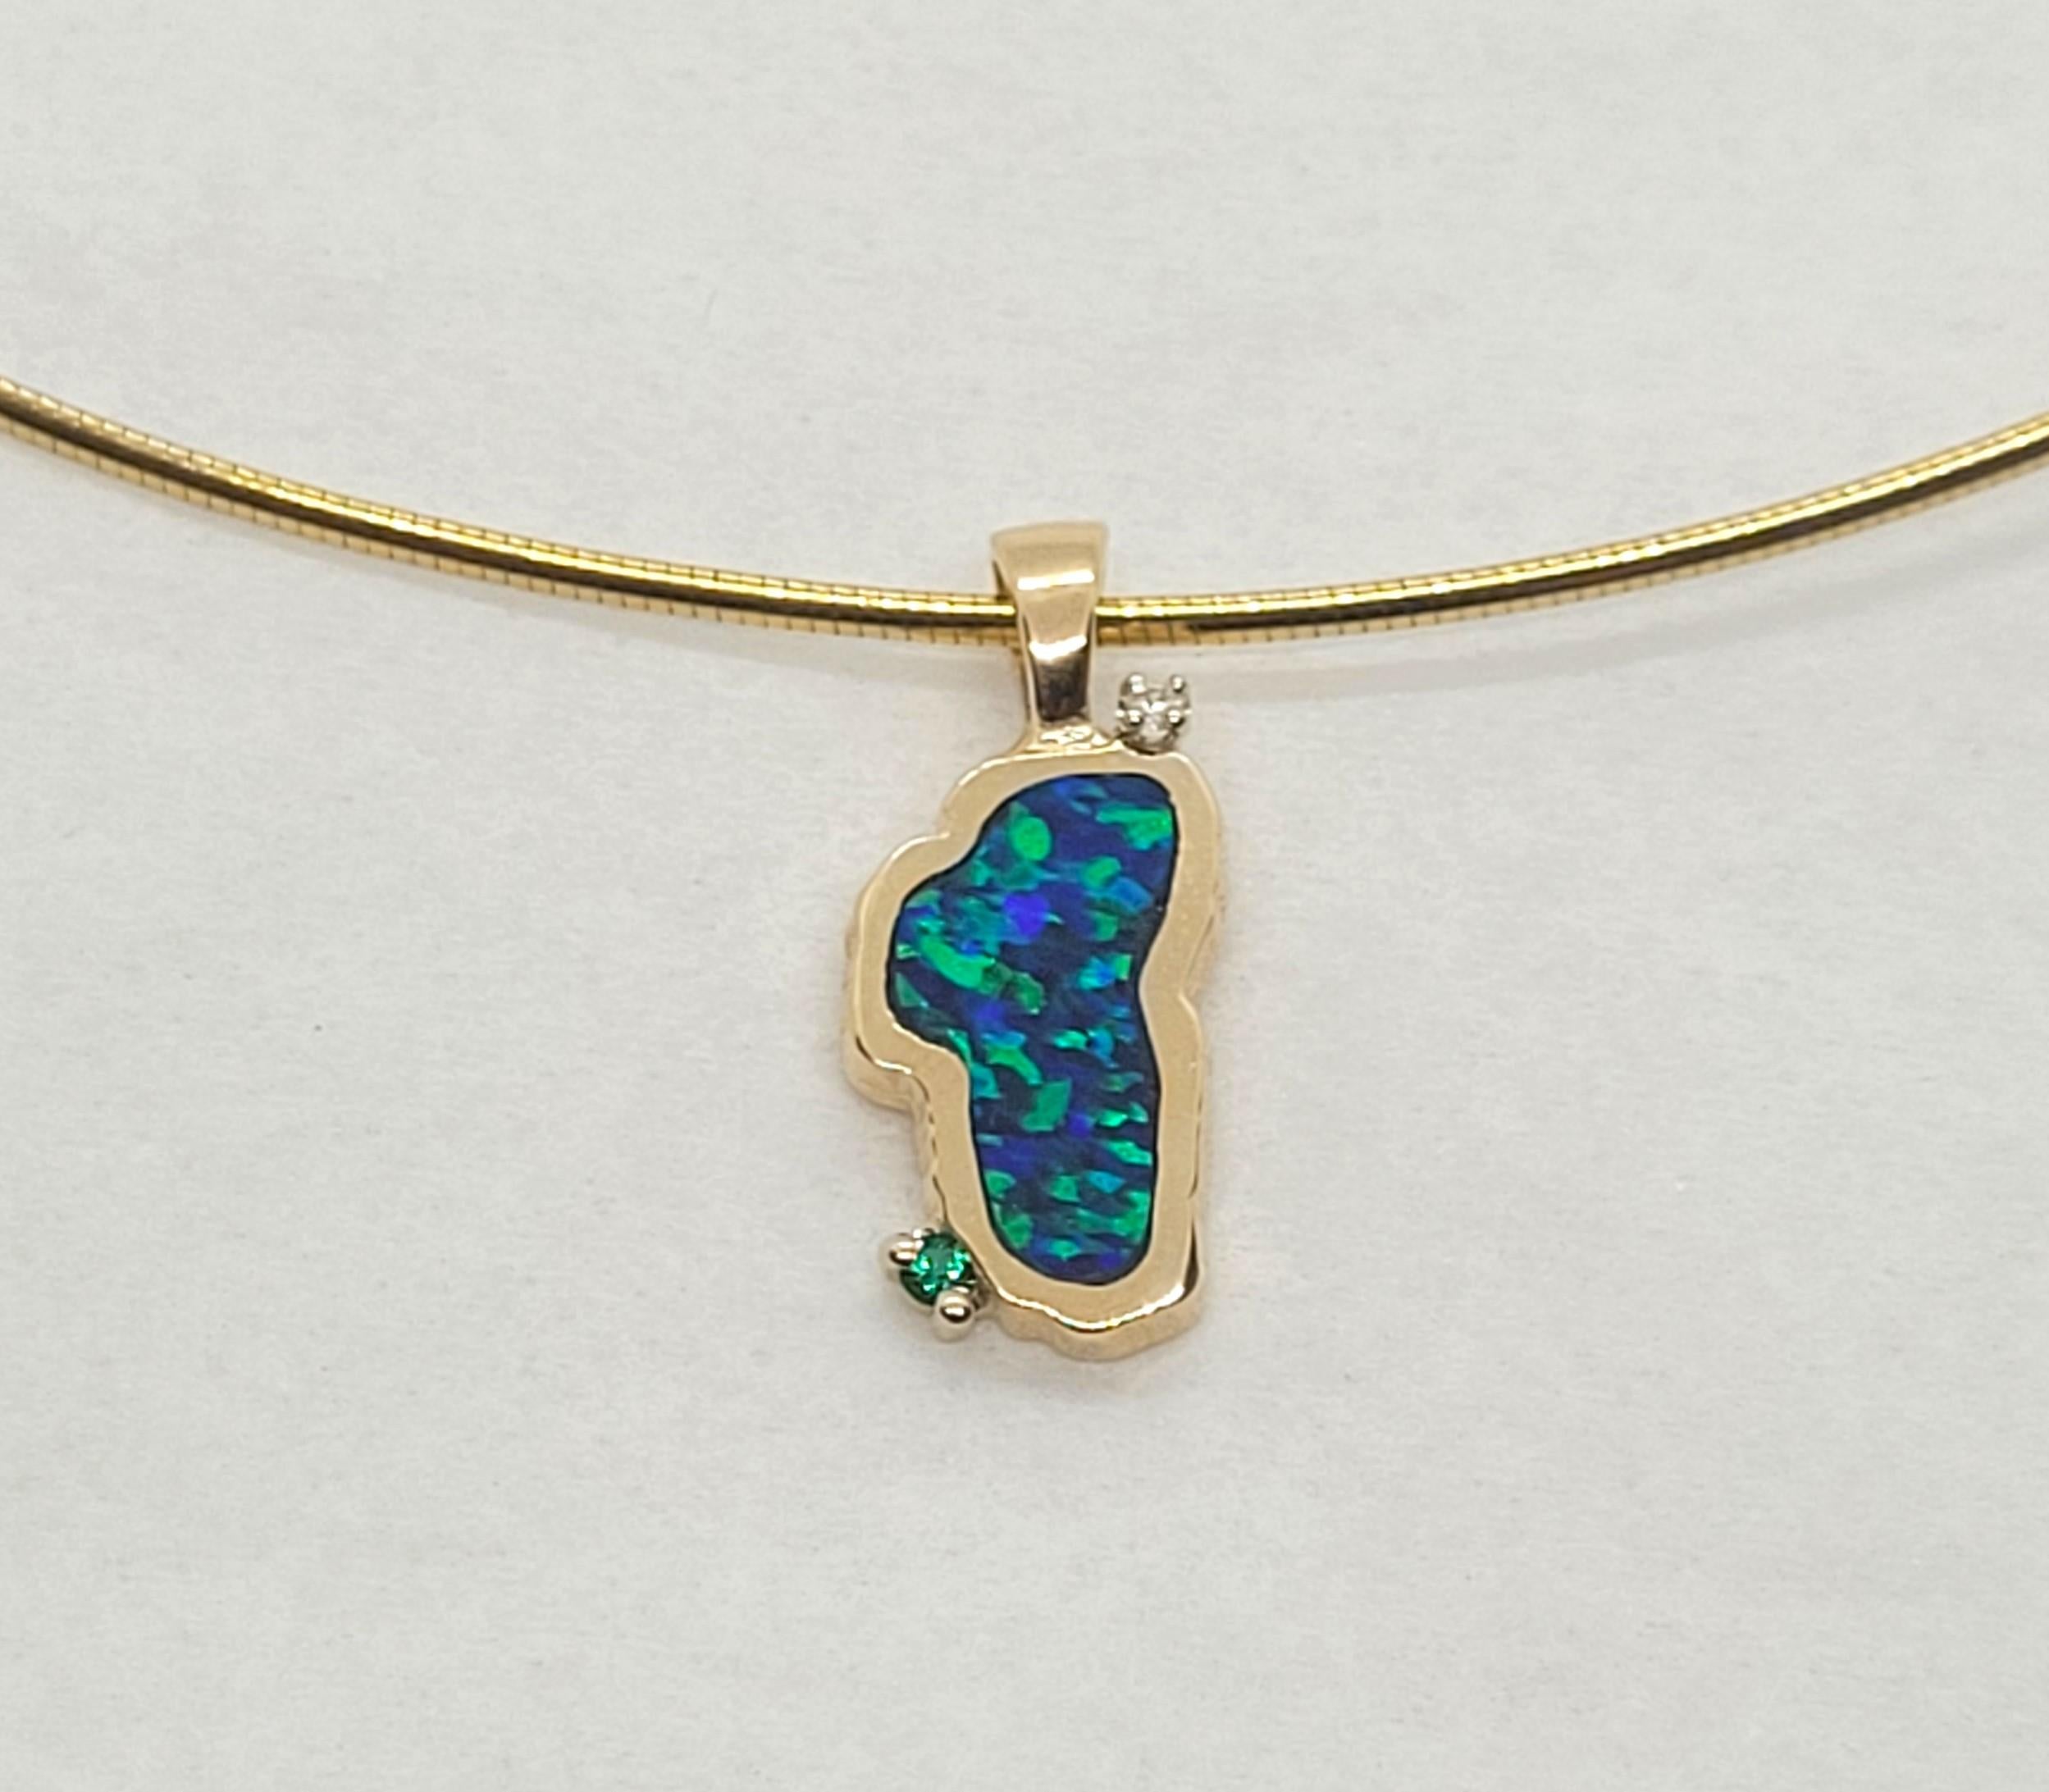 14kt yellow gold freeform pendant with a simulated opal, a round brilliant diamond, and round green stone. The pendant is 23 x 10mm in size (including the bail), 3.2 grams, stamped 14k, and overall in very good condition (chain is sold separately).